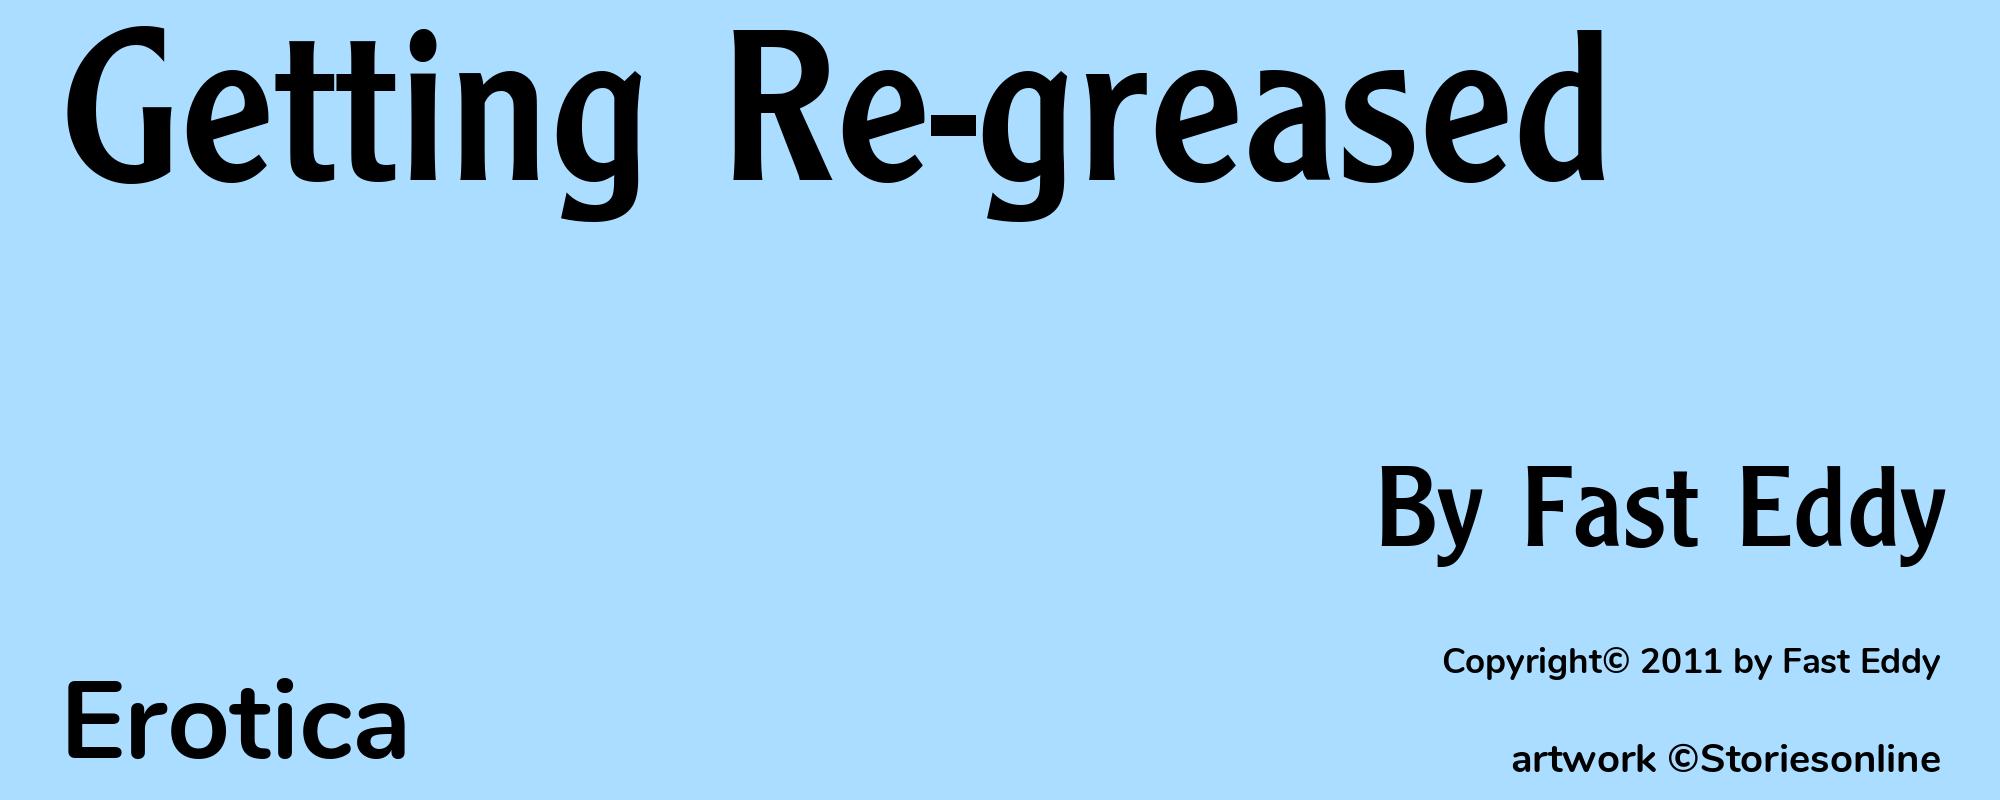 Getting Re-greased - Cover